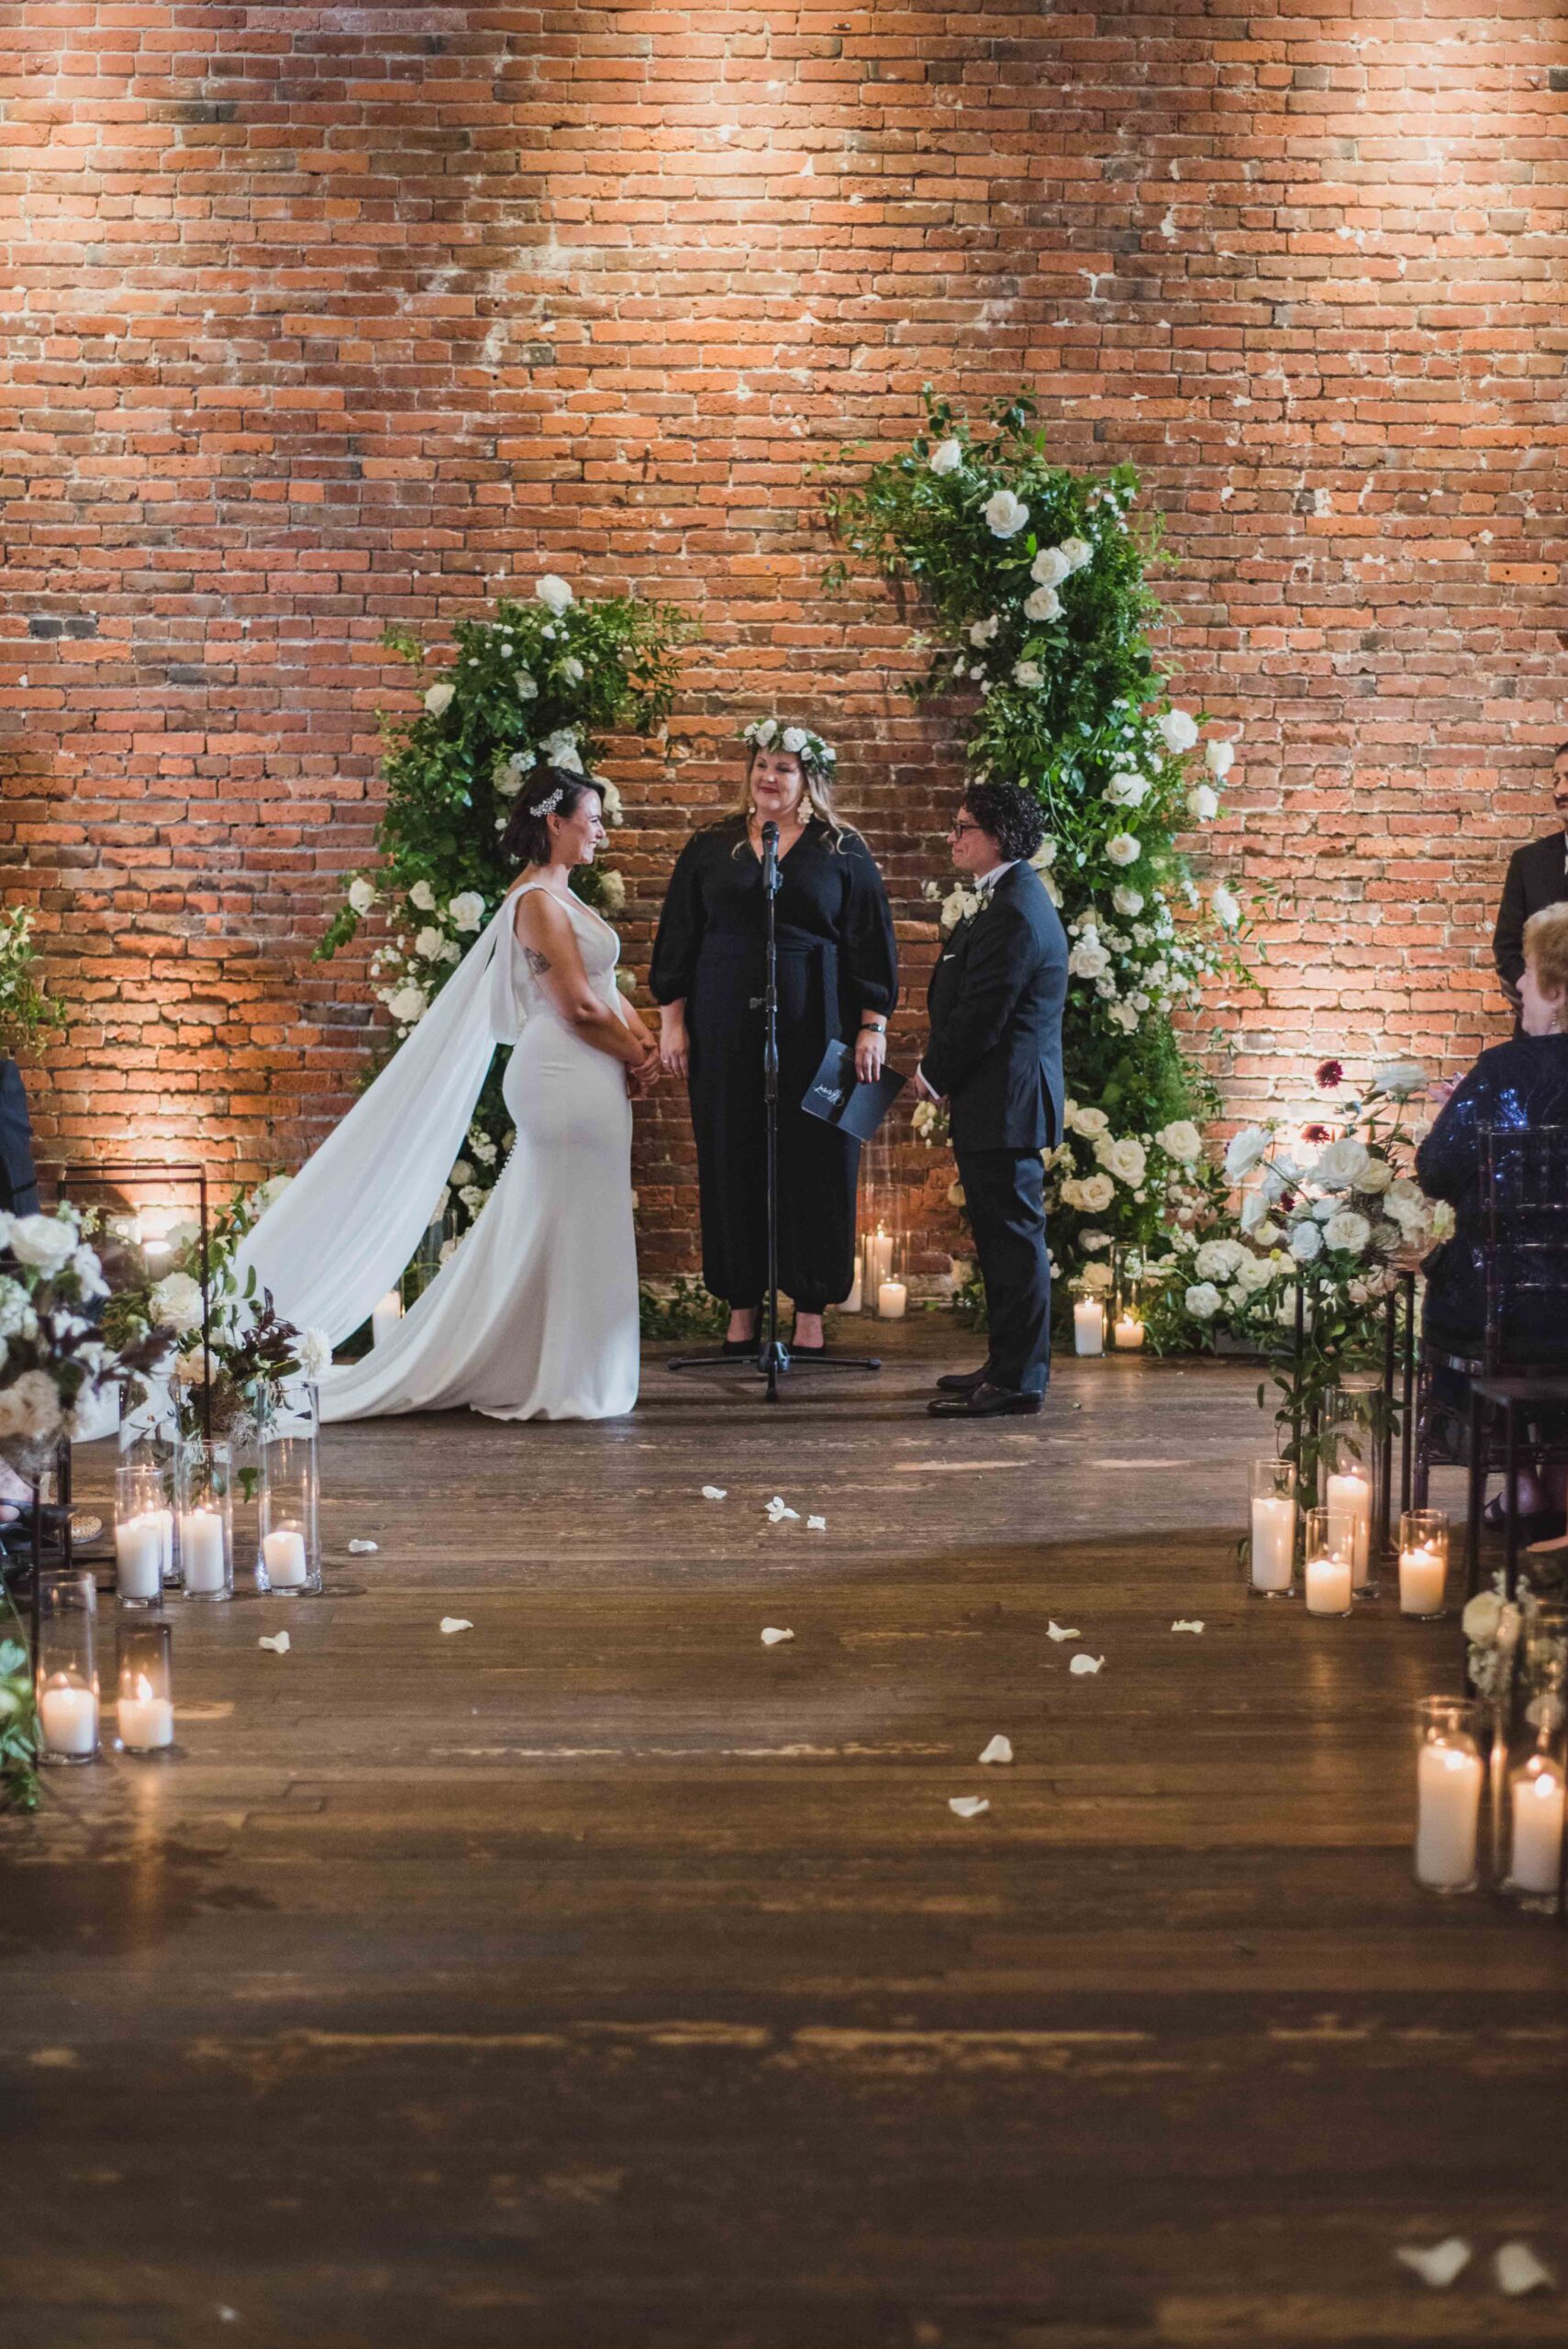 Brides stand during the ceremony in front of their lush floral and green arch designed by Seattle florist.